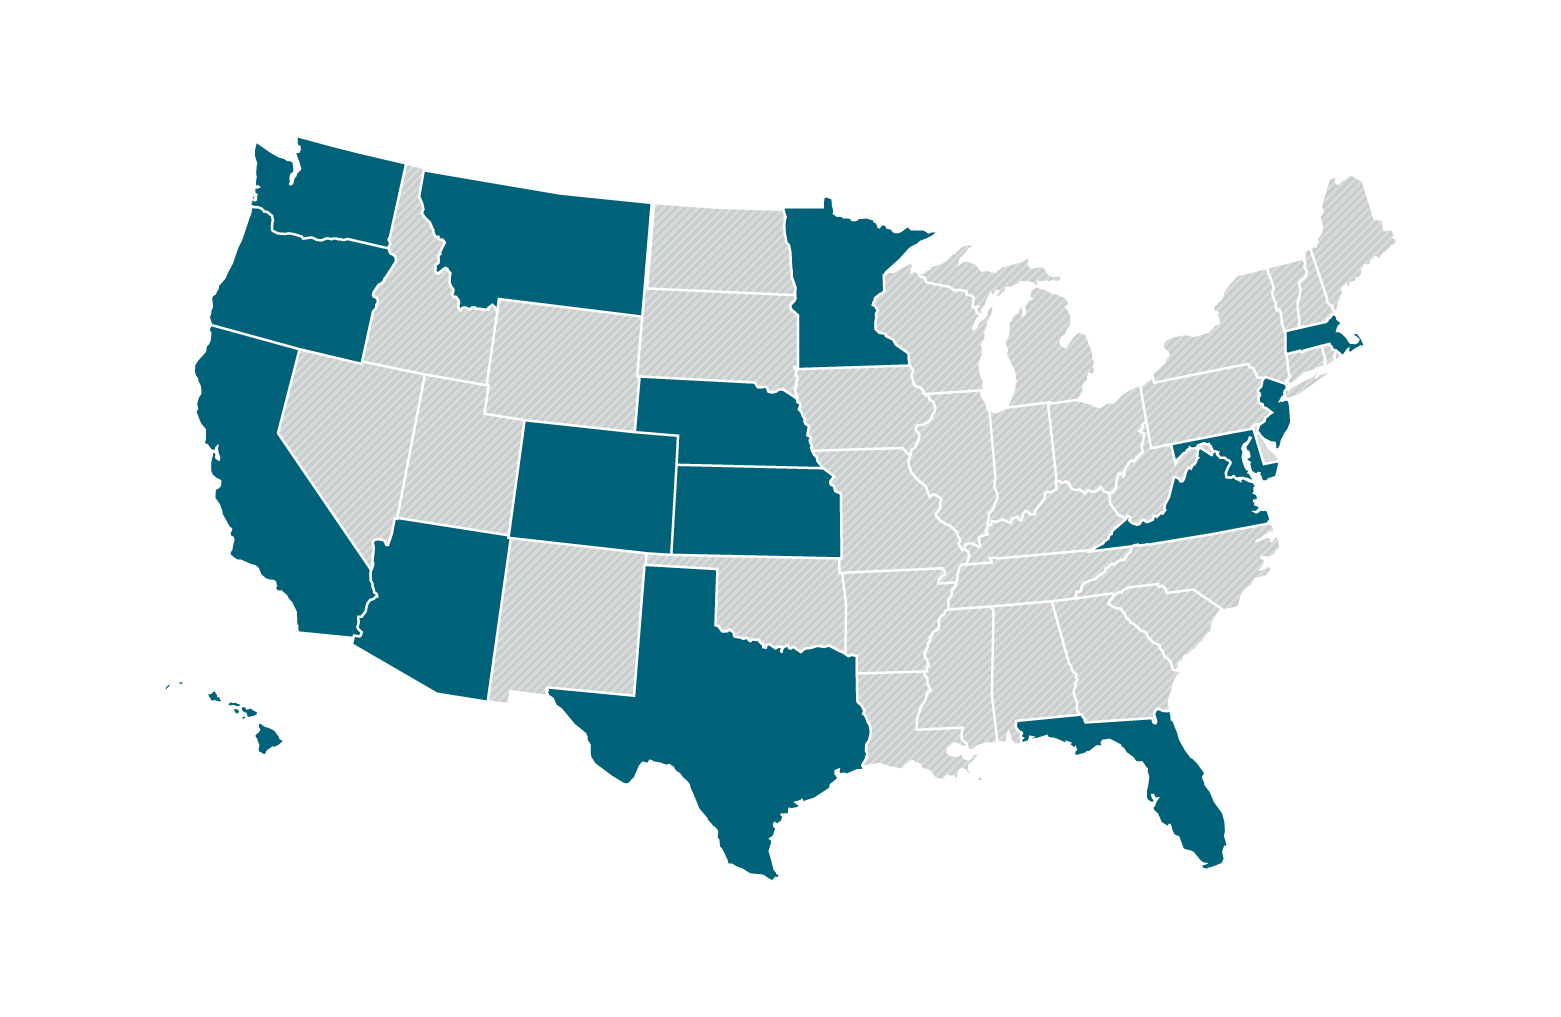 A map of KJ's office locations. States where KJ has an office are dark teal and states without an office are light grey.